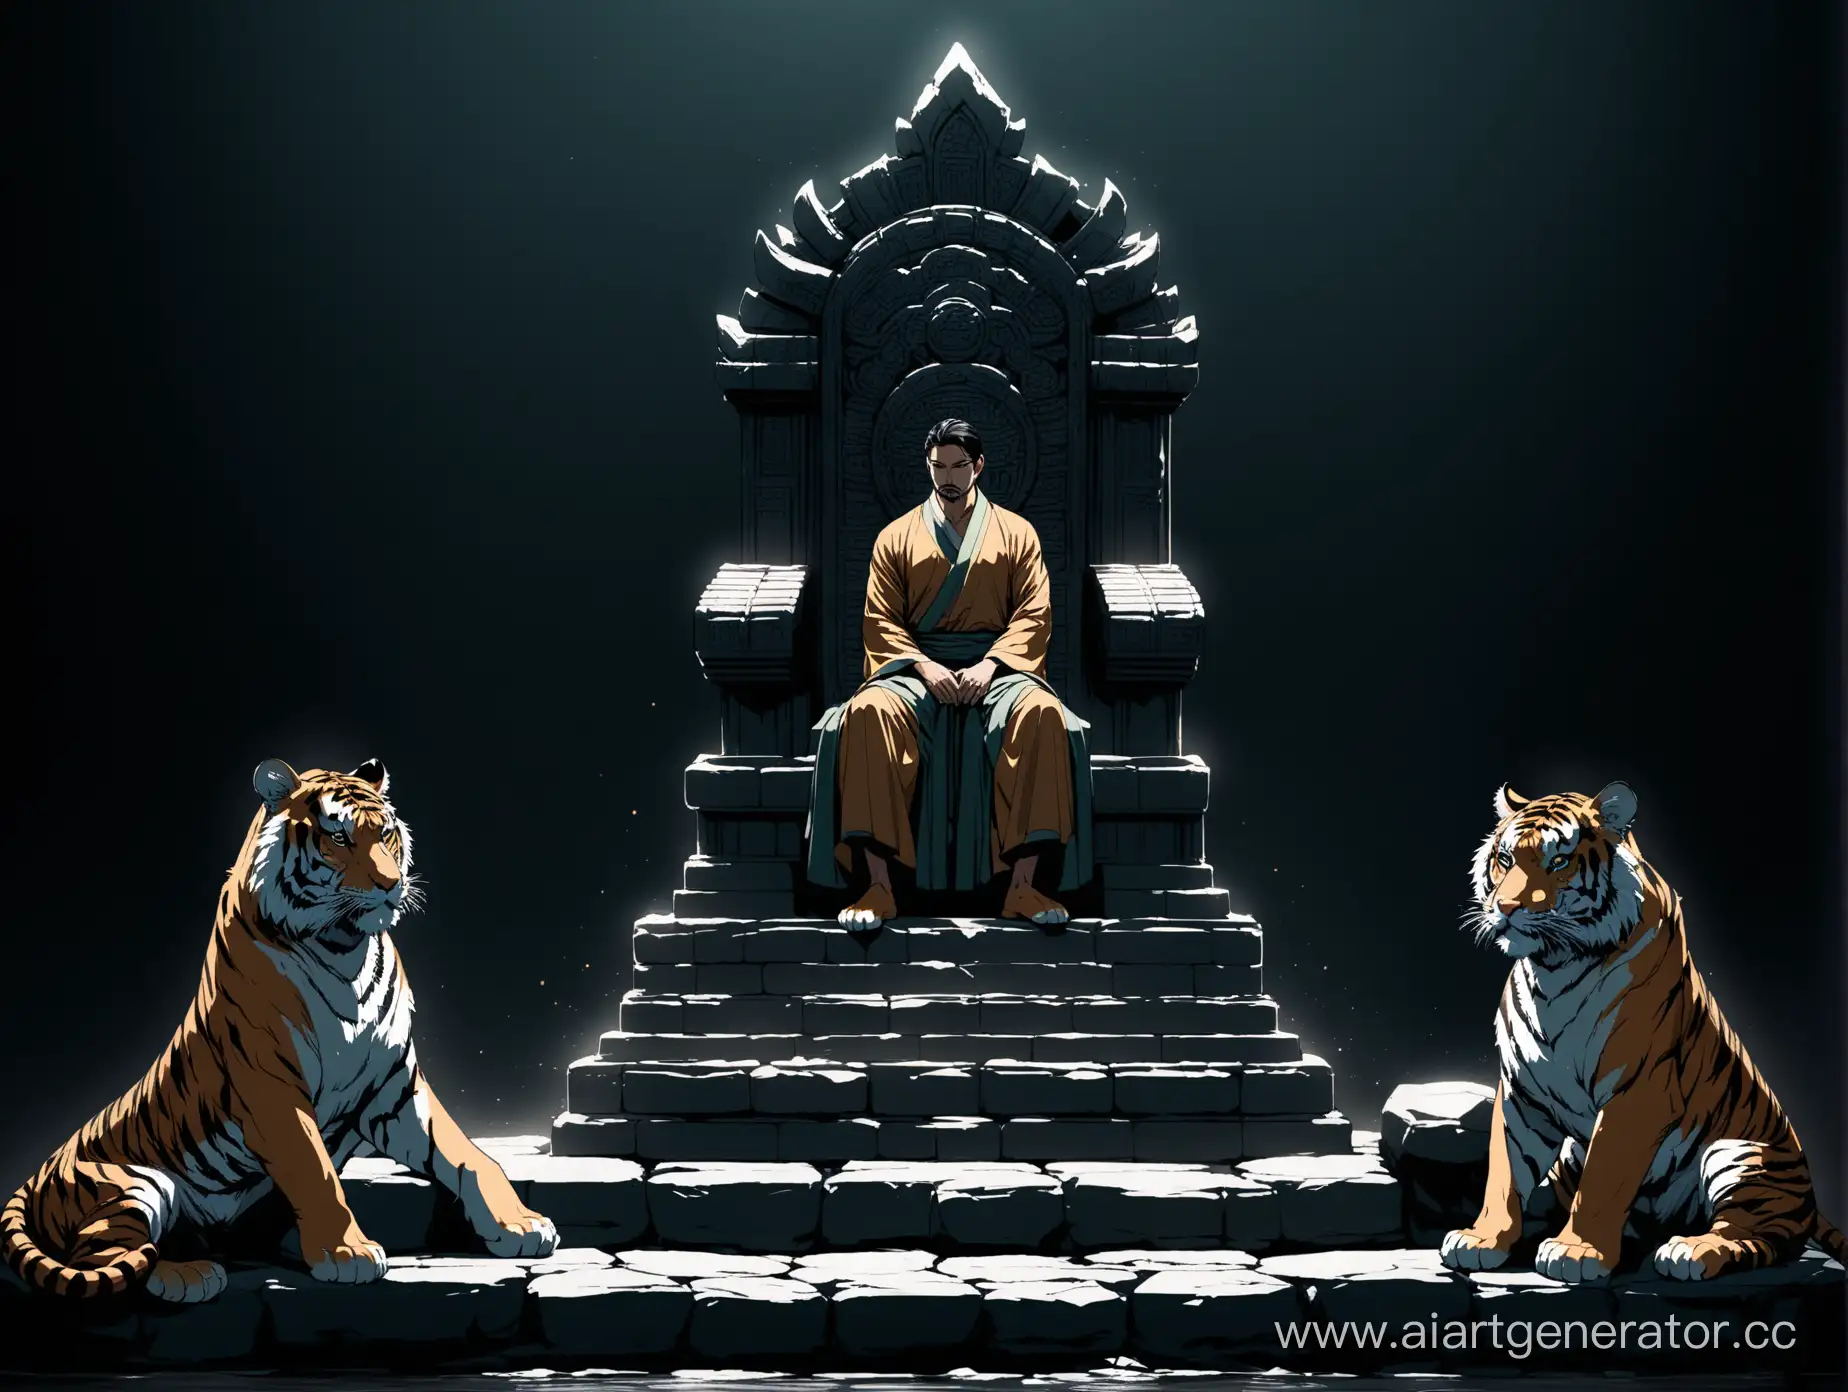 Regal-Man-on-Stone-Throne-with-Two-Tigers-in-Dark-Setting